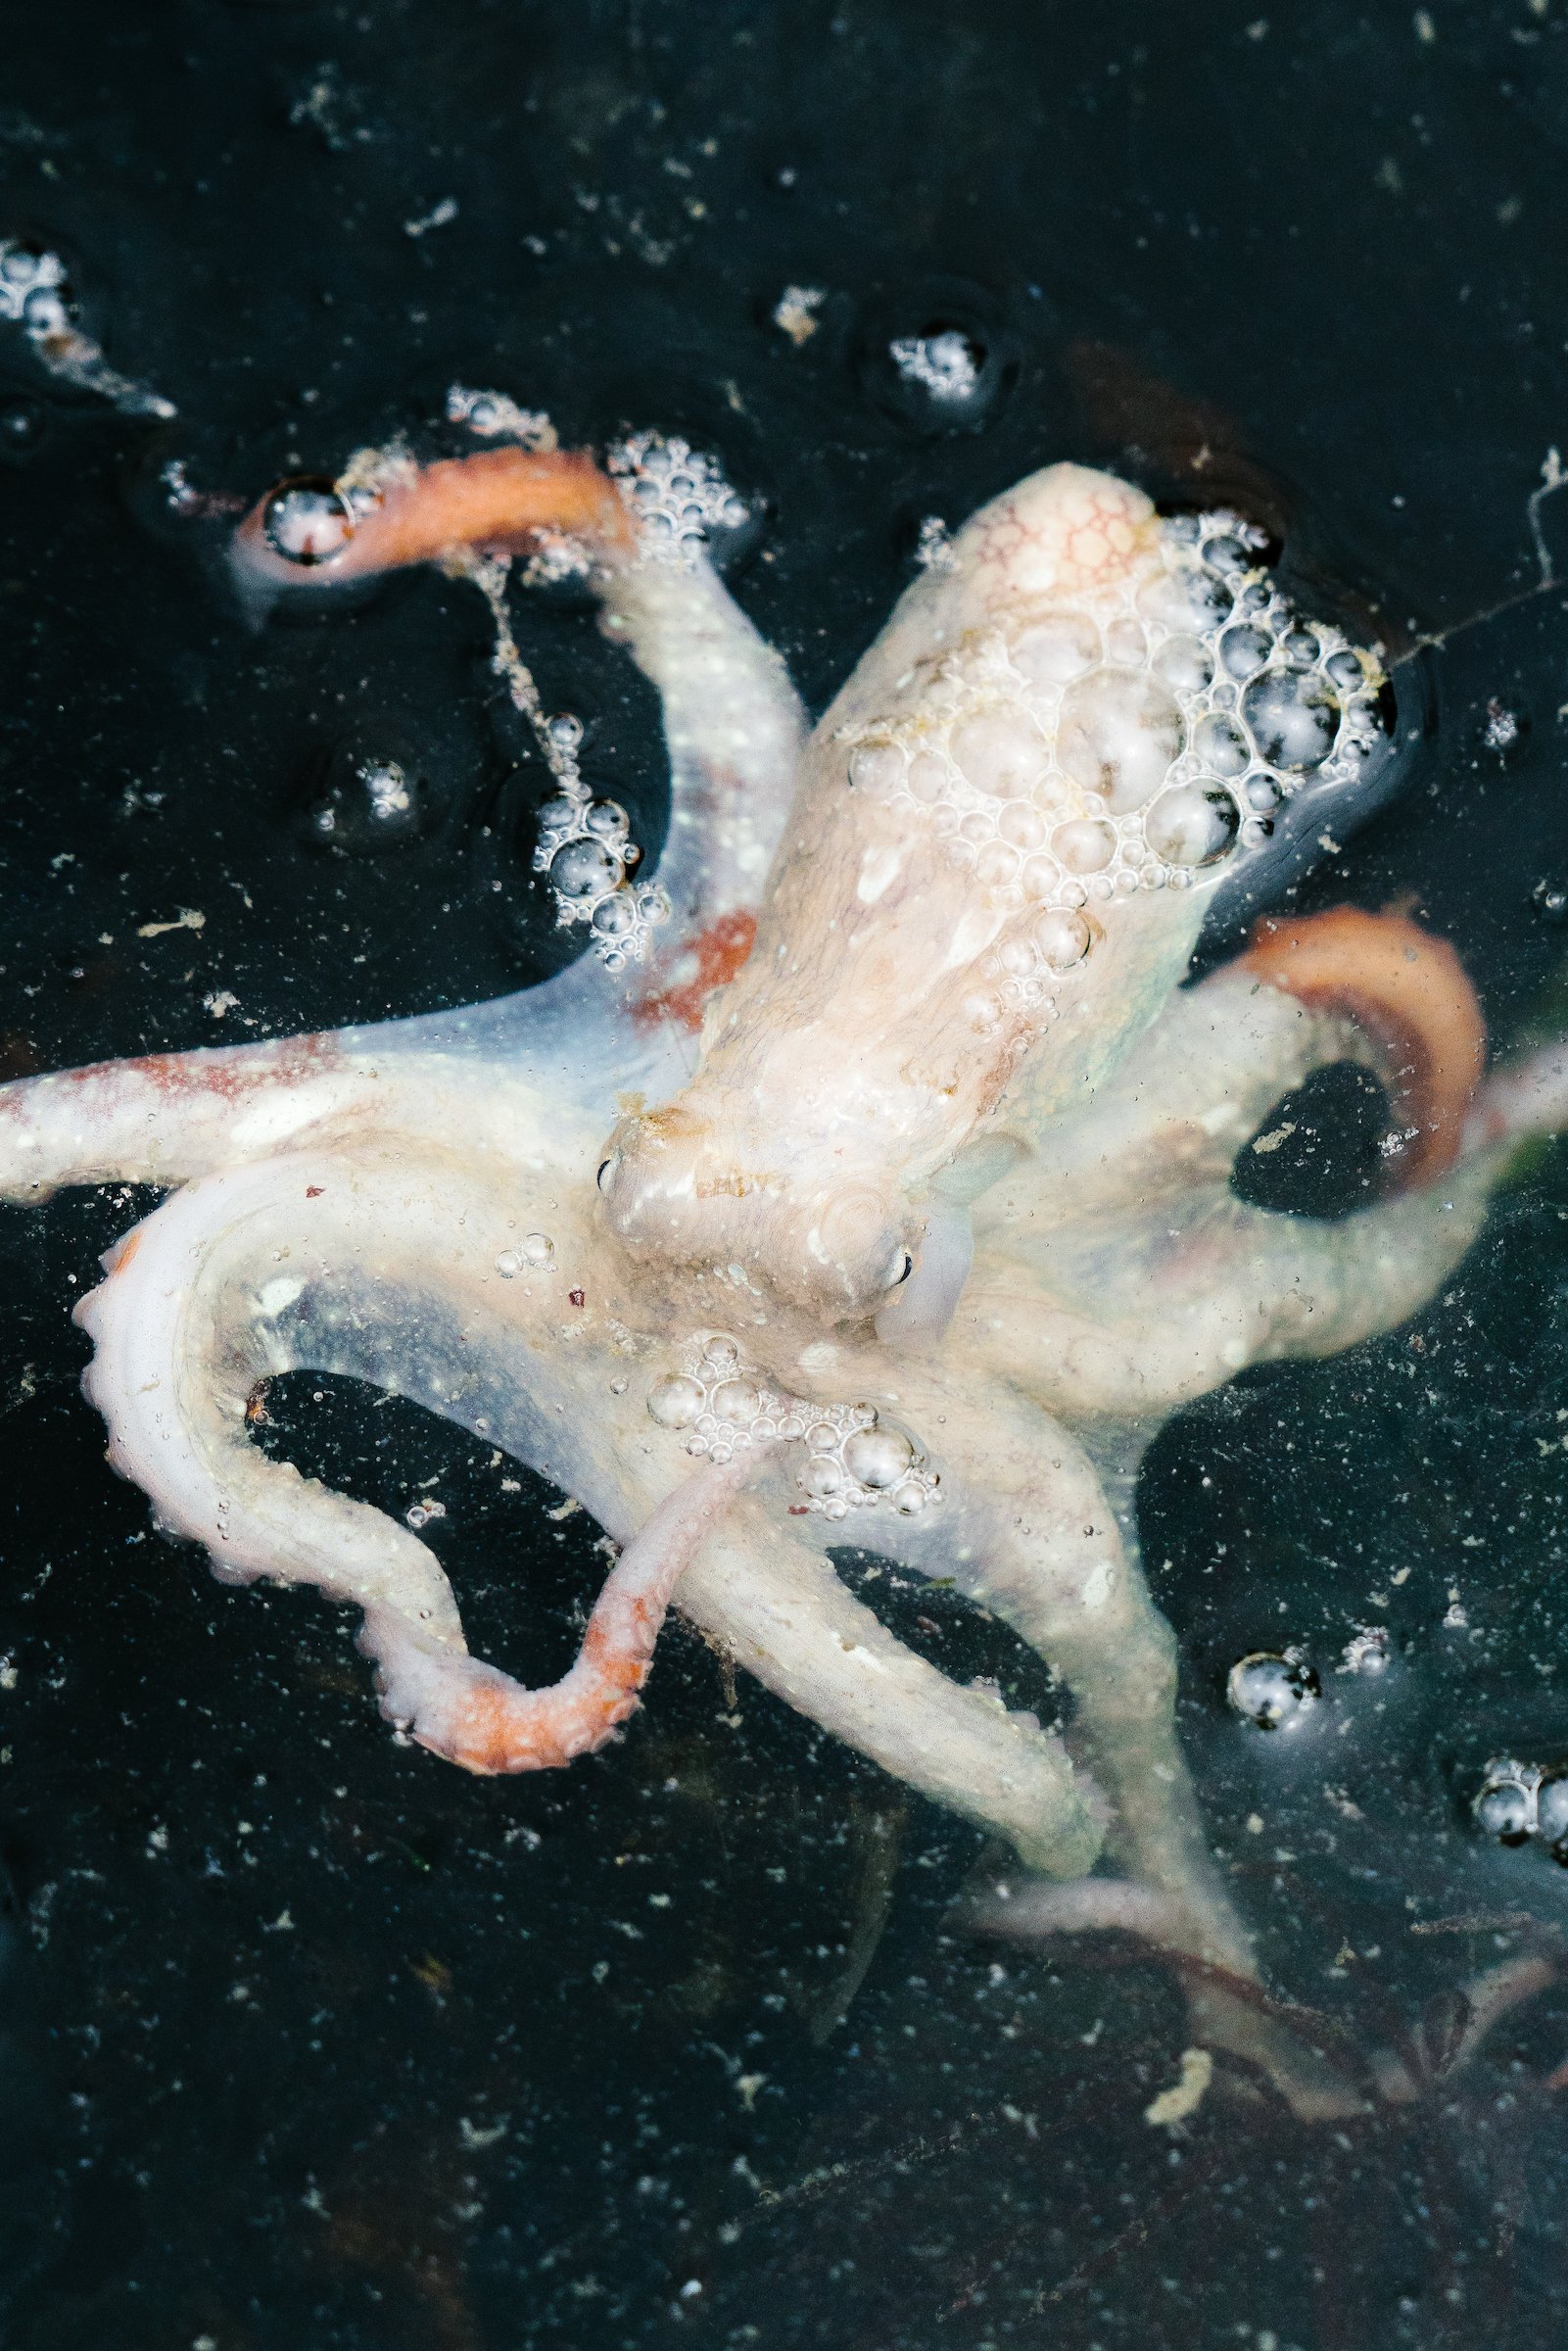 Where to see octopus near Seattle